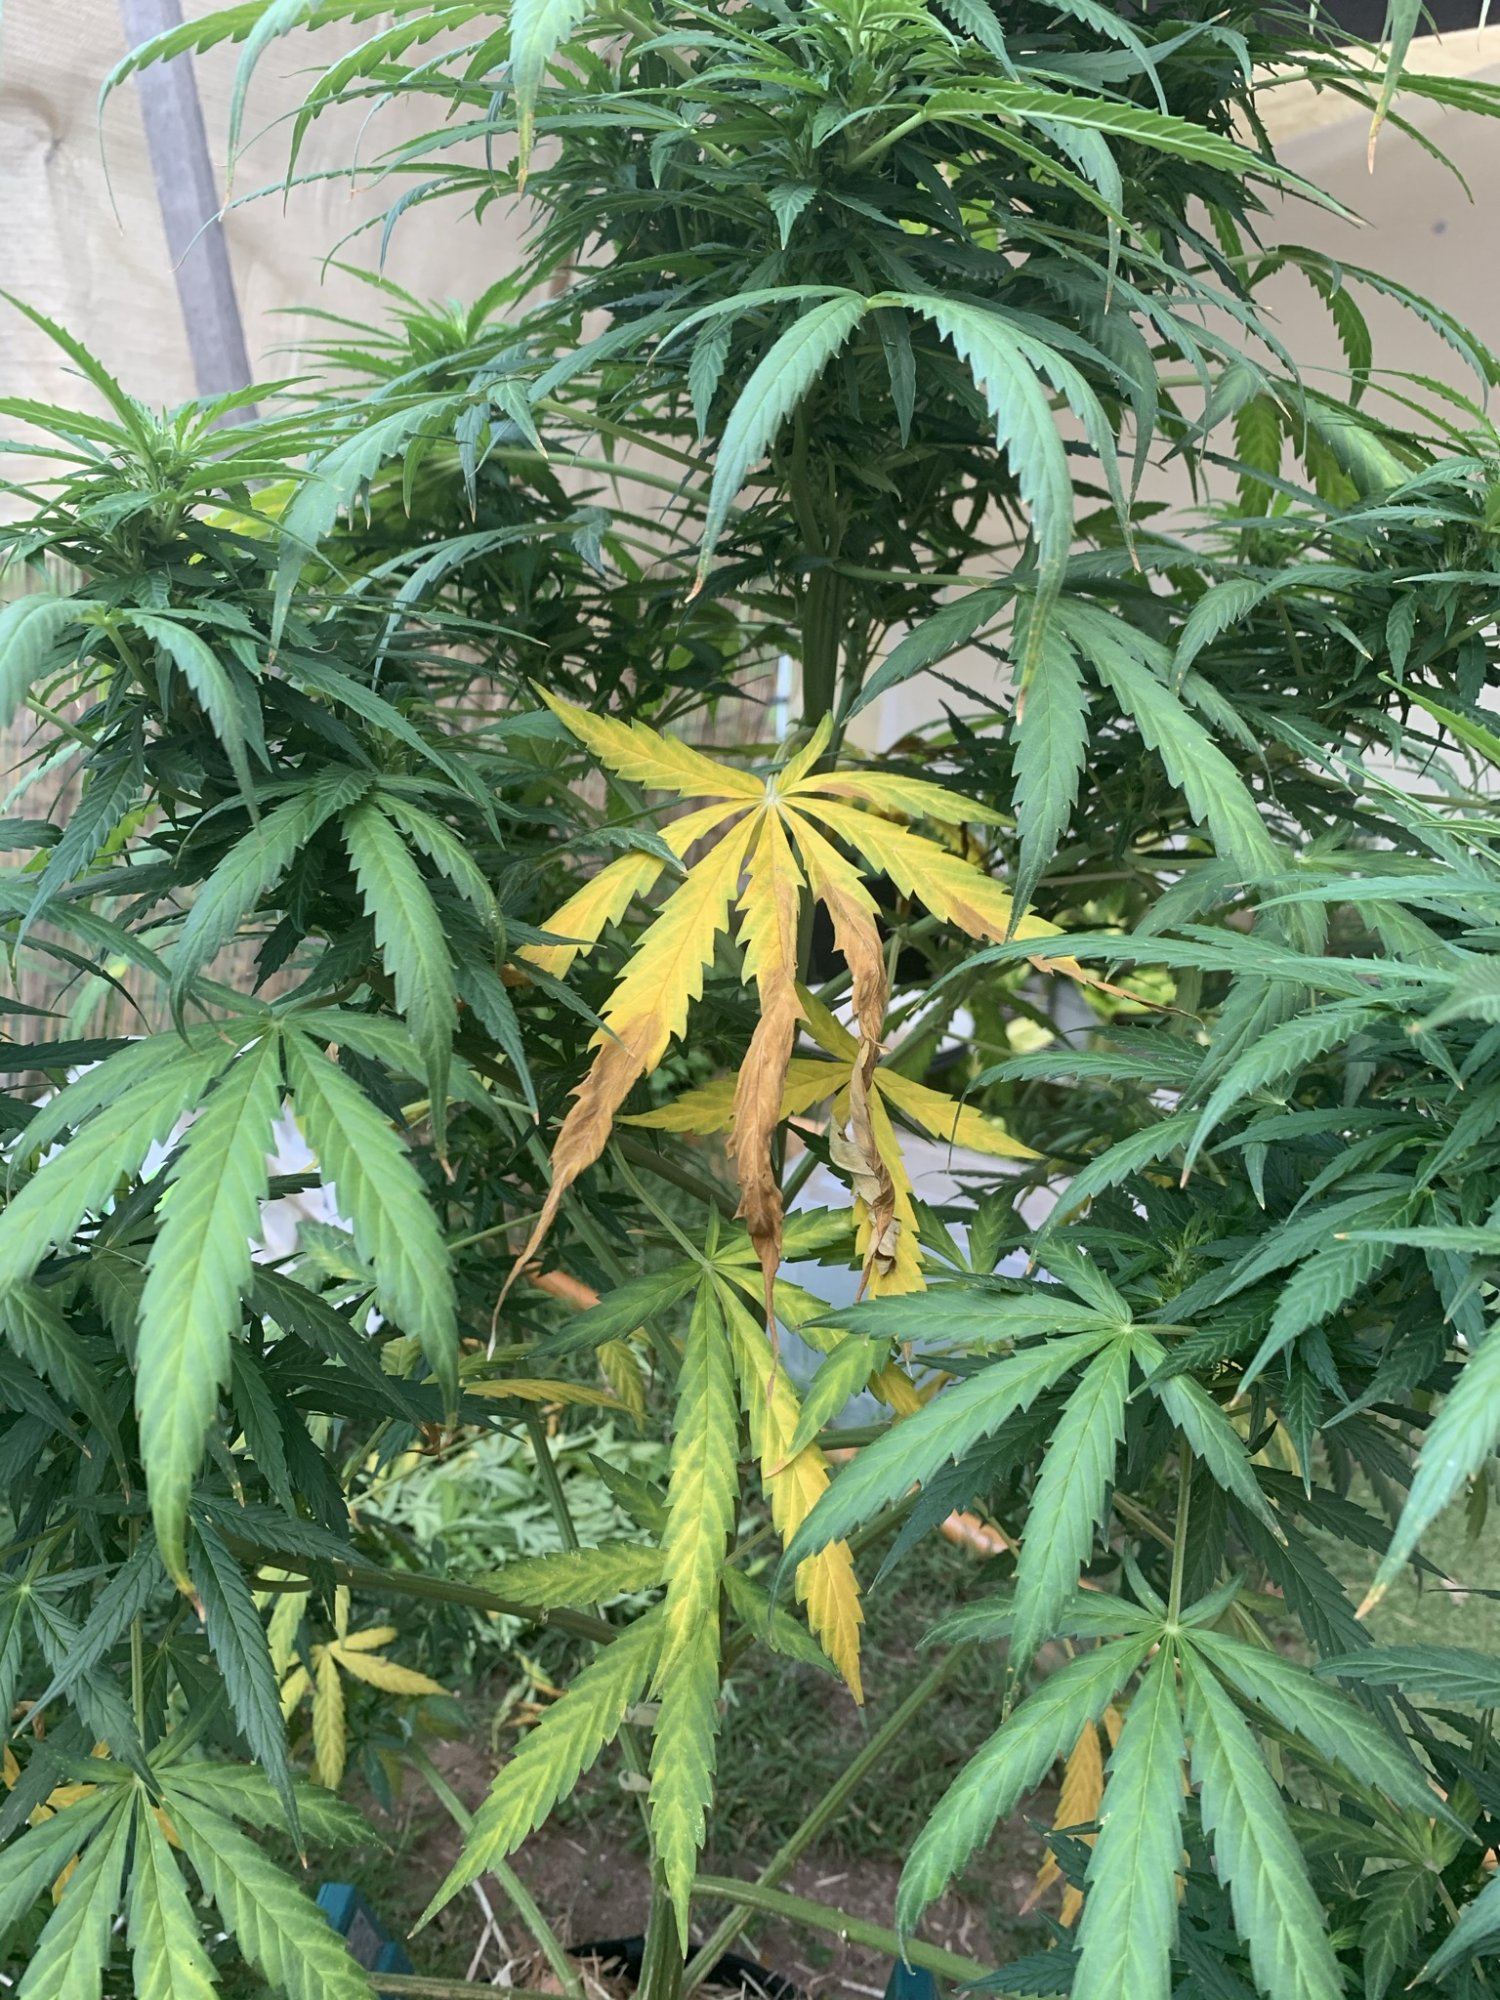 Yellowing leaves